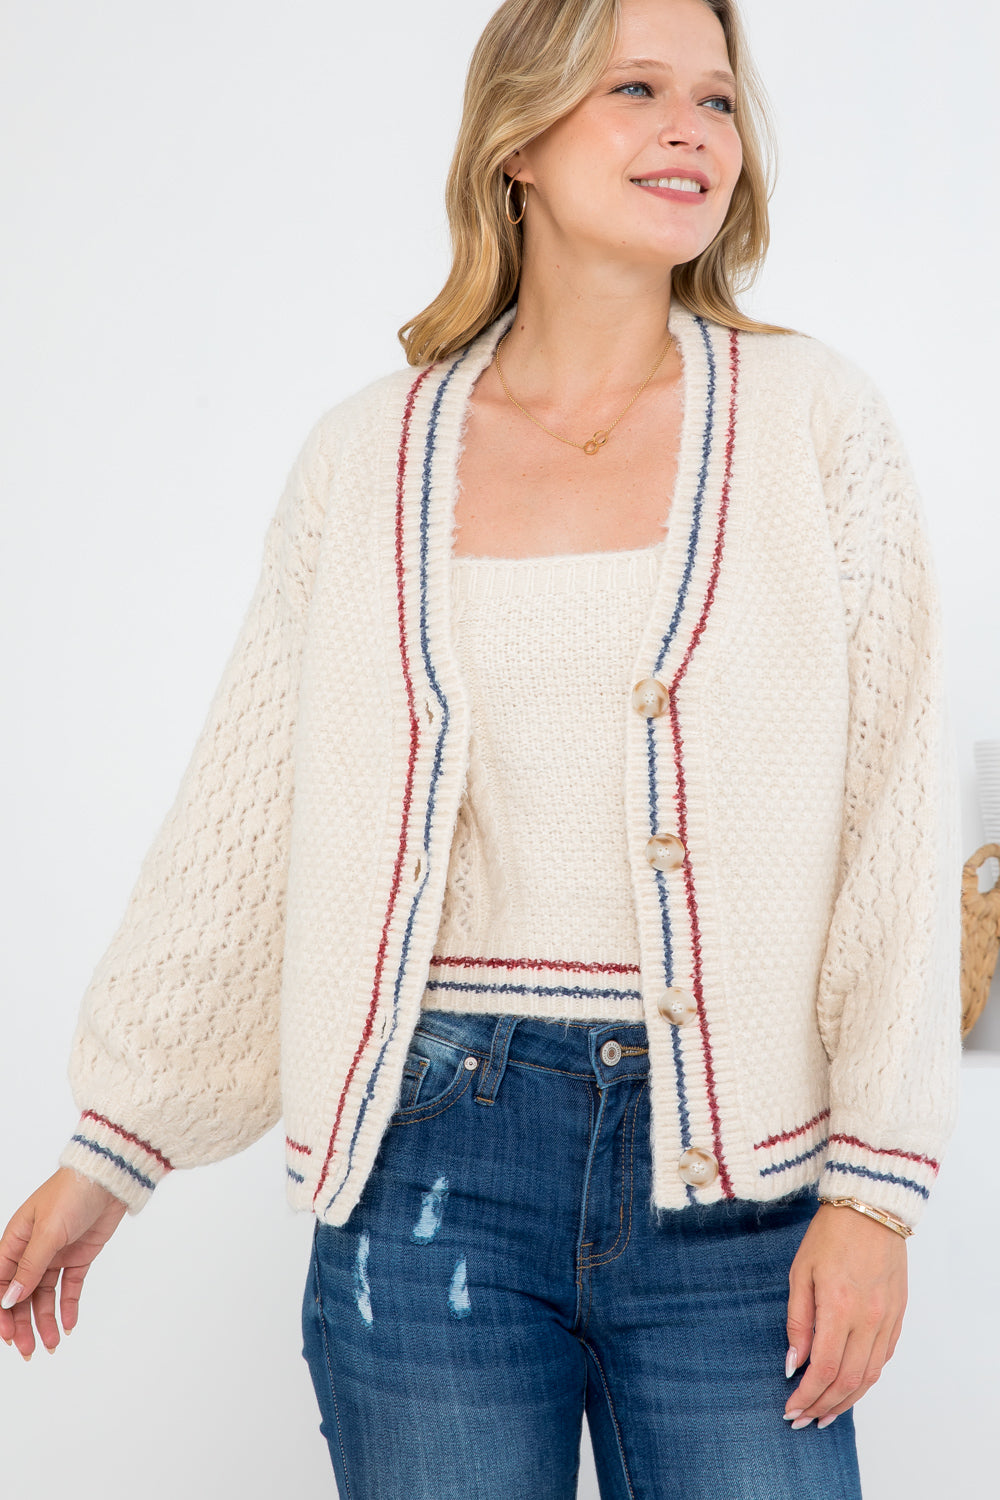 Croped Tank and Long Sleeve Jacket Sweater Set